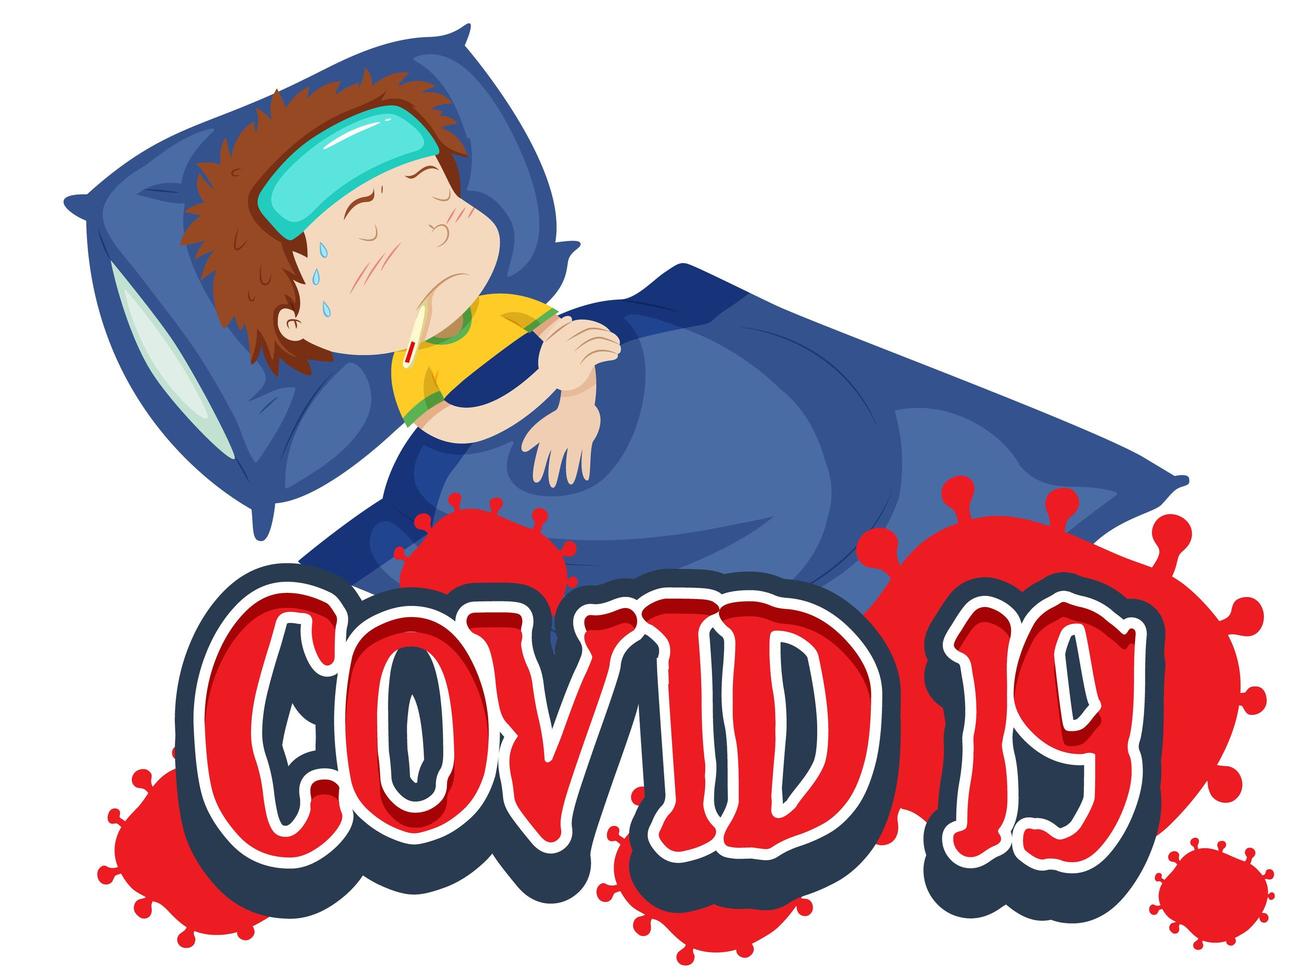 Boy with fever in bed and Covid 19 text vector